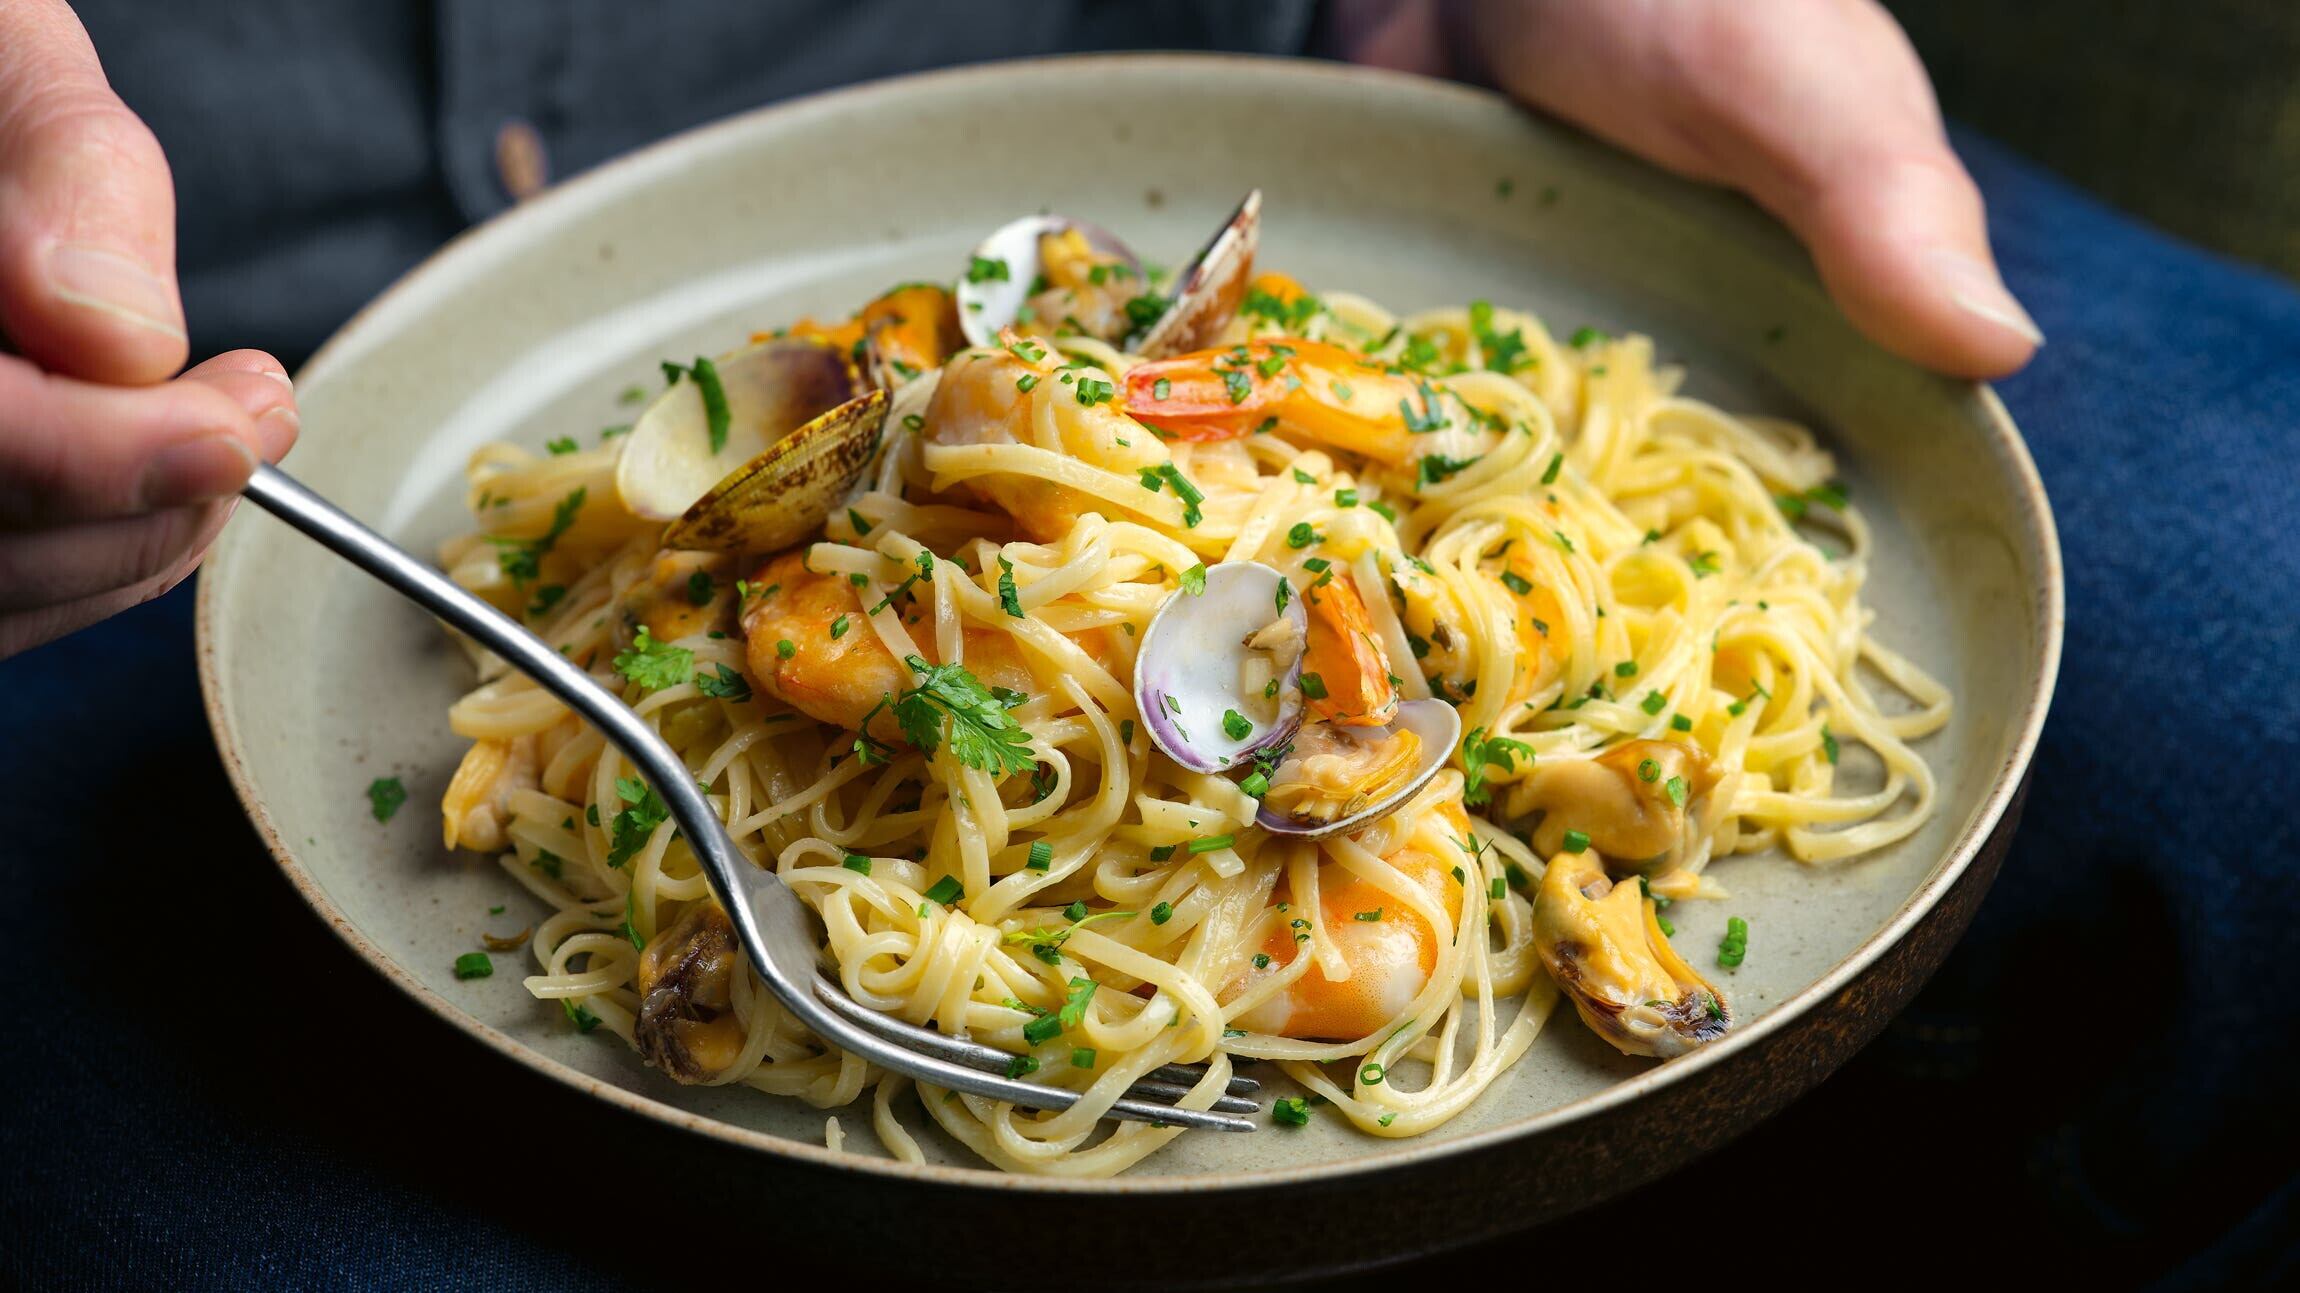 Tagliolini with seafood from Michel Roux At Home (Cristian Barnett/PA)